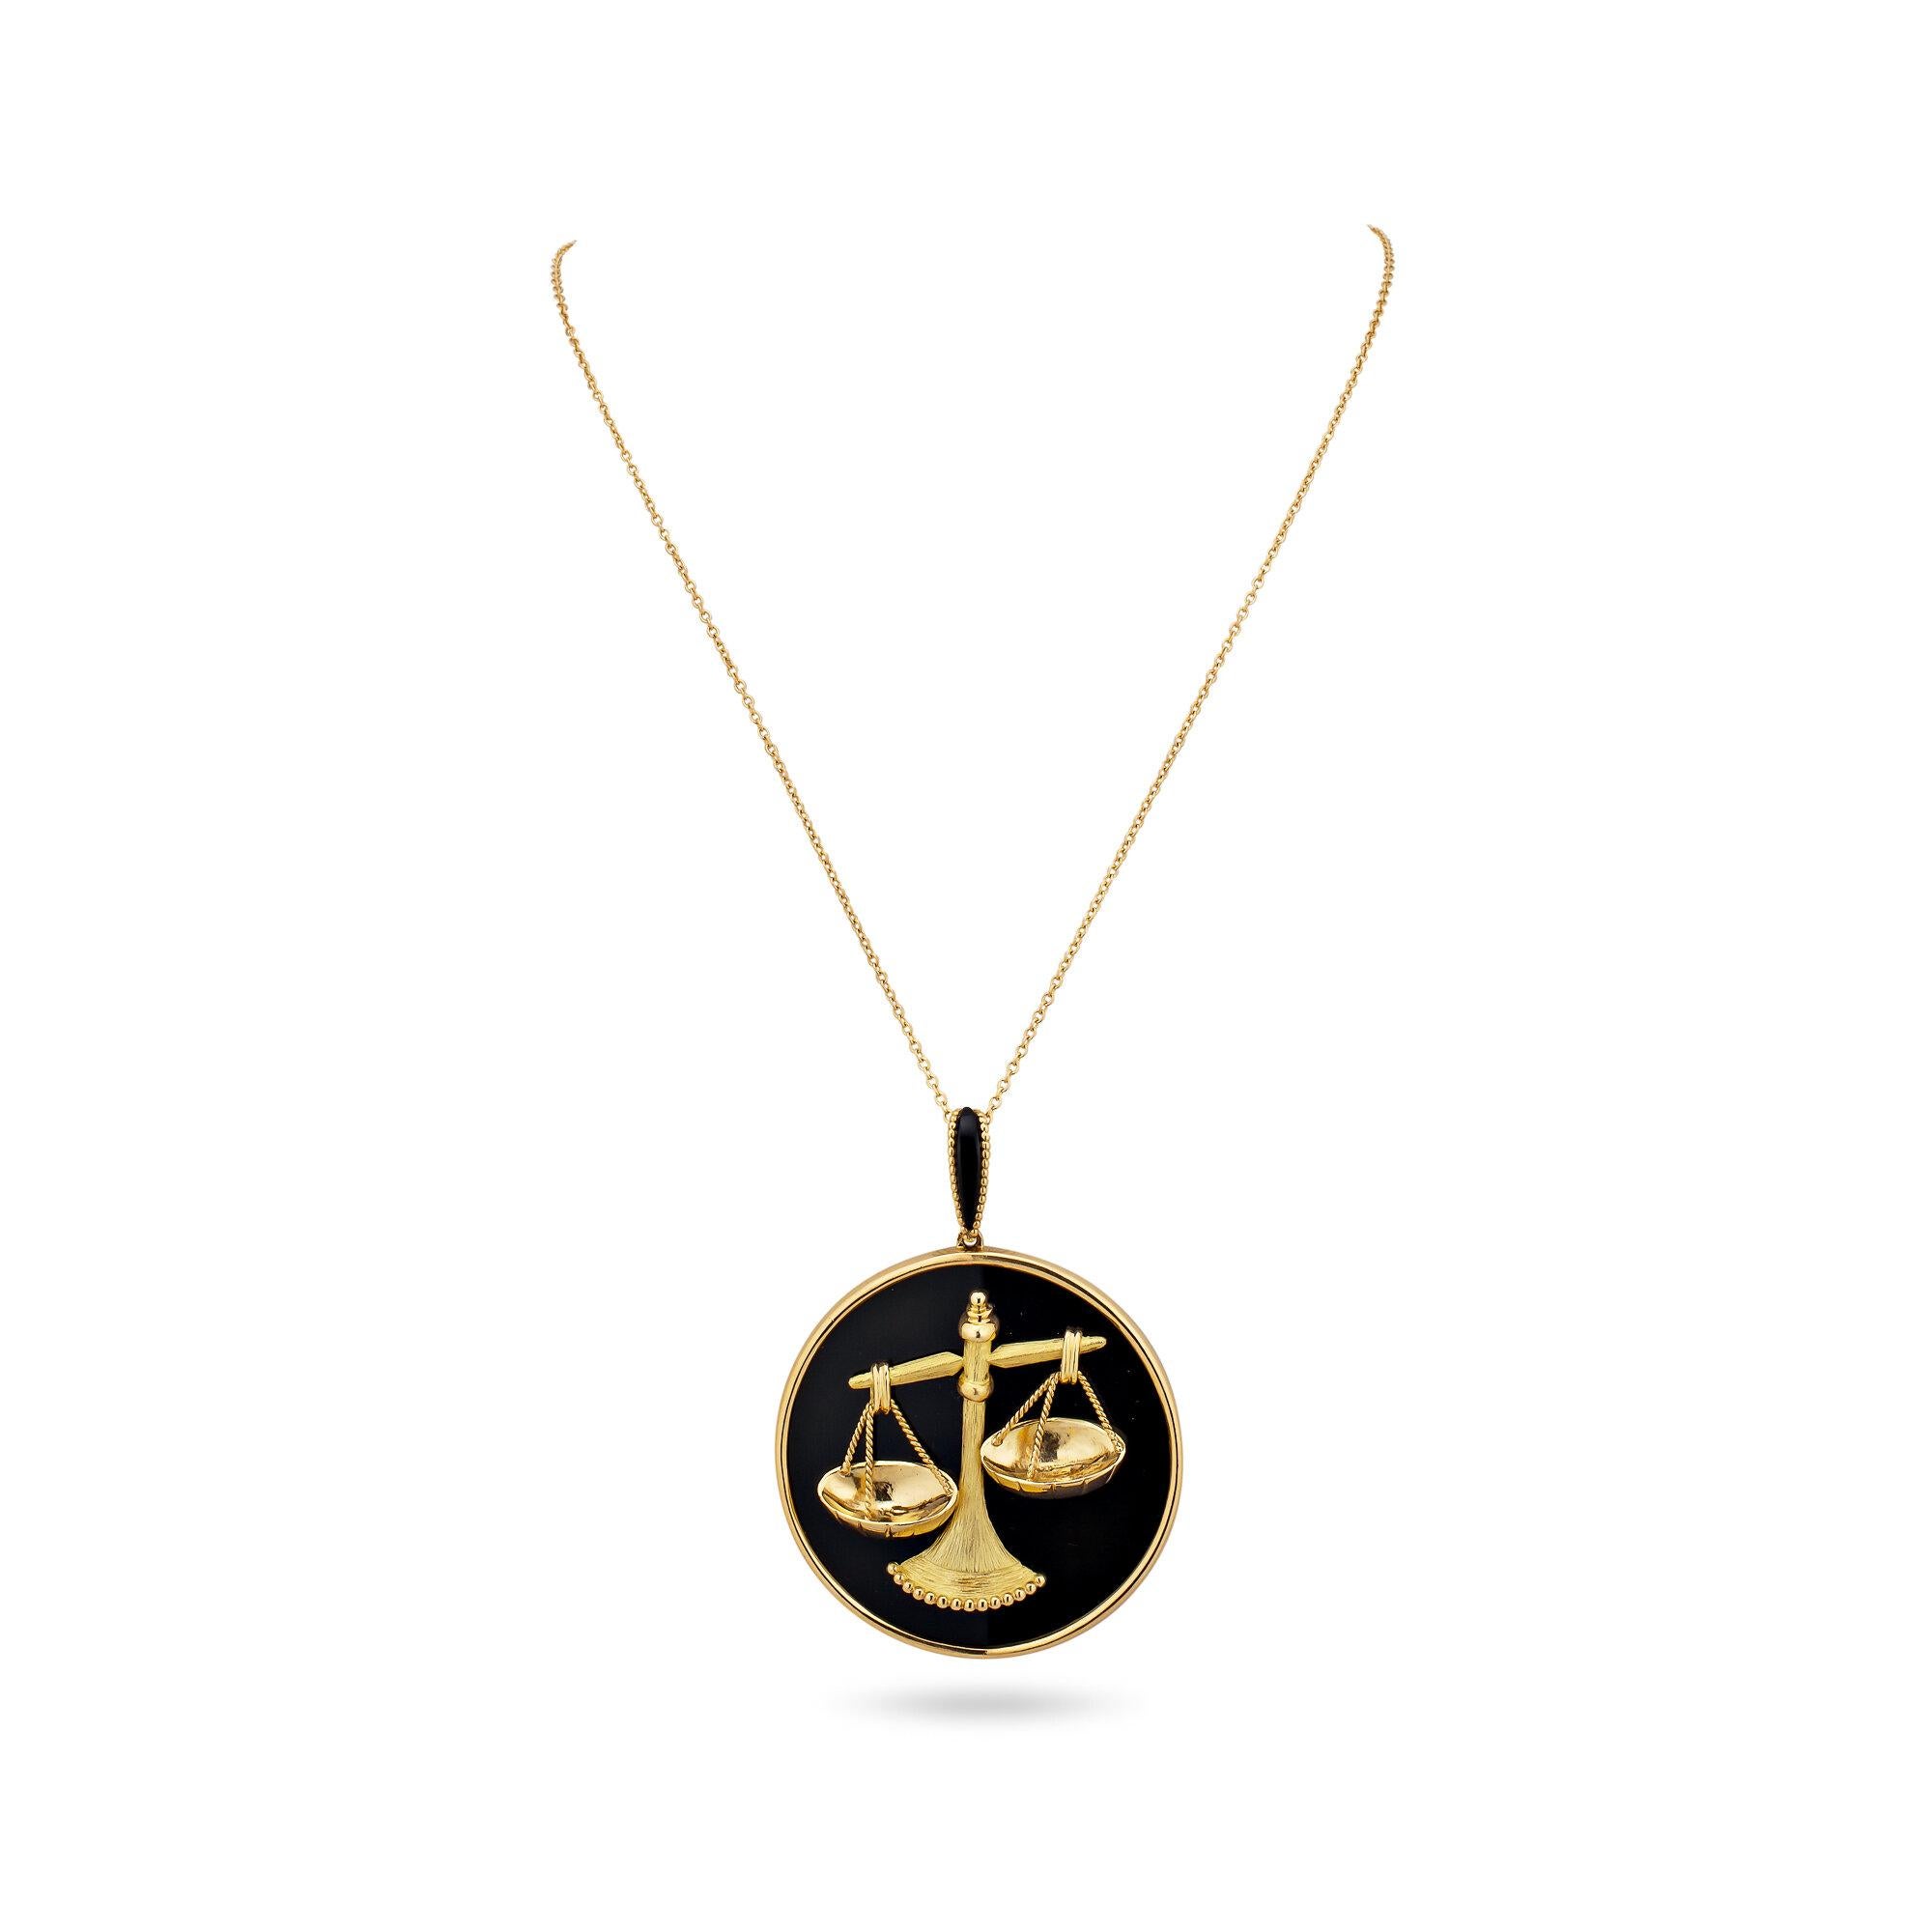 The scale will be tipped in your favor when wearing this Mauboussin Paris Libra zodiac gold and onyx vintage pendant necklace.  Representing balance, this statement pendant belongs to both those born under the libra zodiac sign and those leaders of